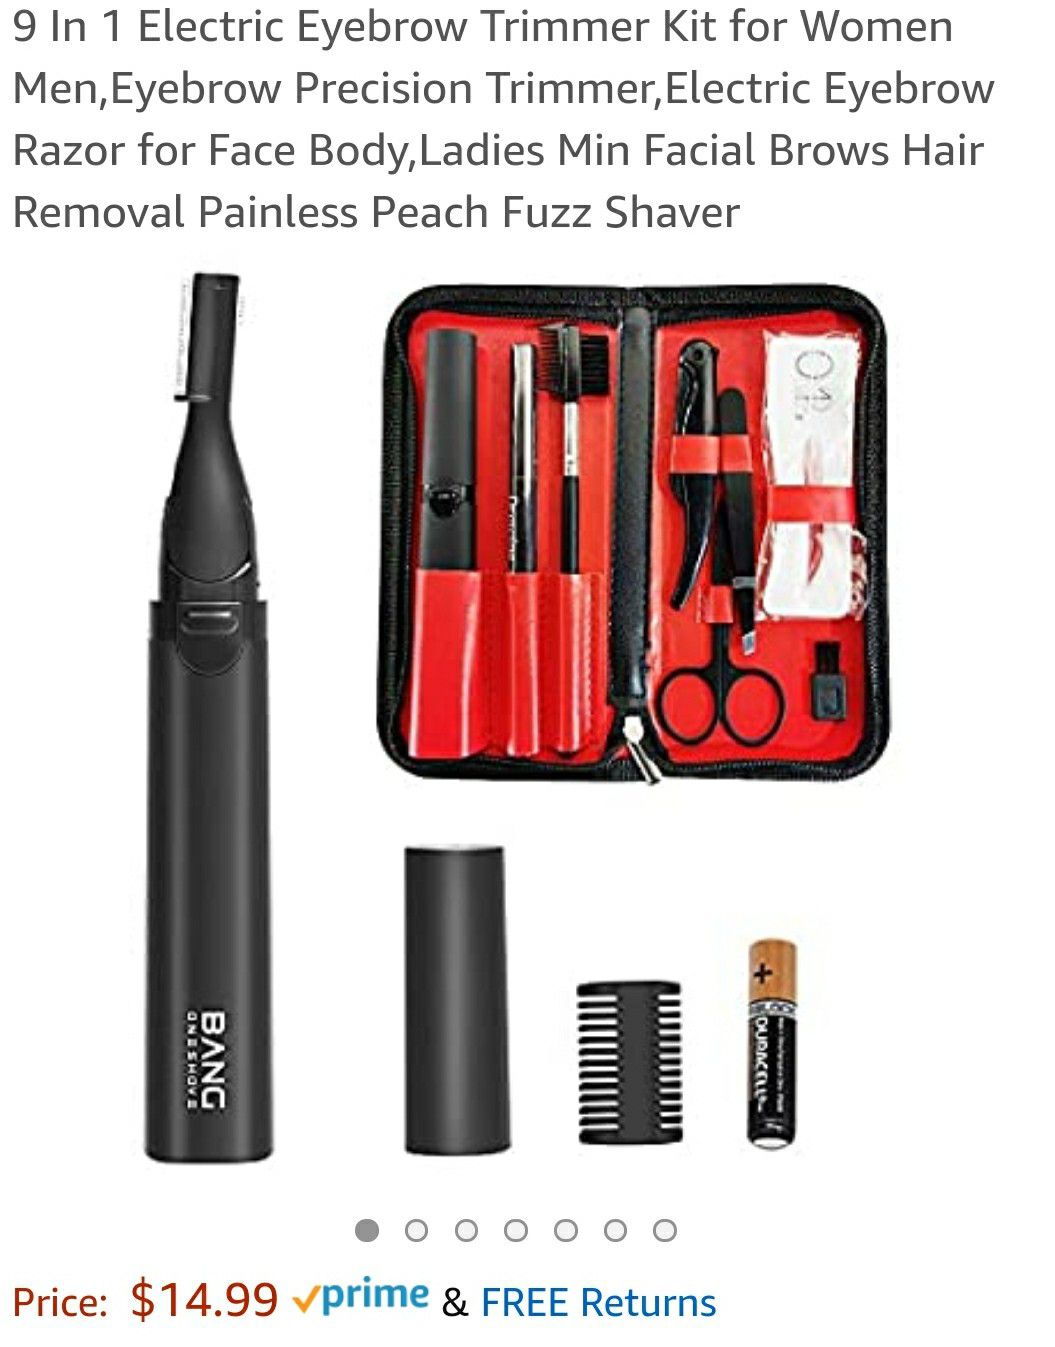 9 In 1 Electric Eyebrow Trimmer Kit for Women Men